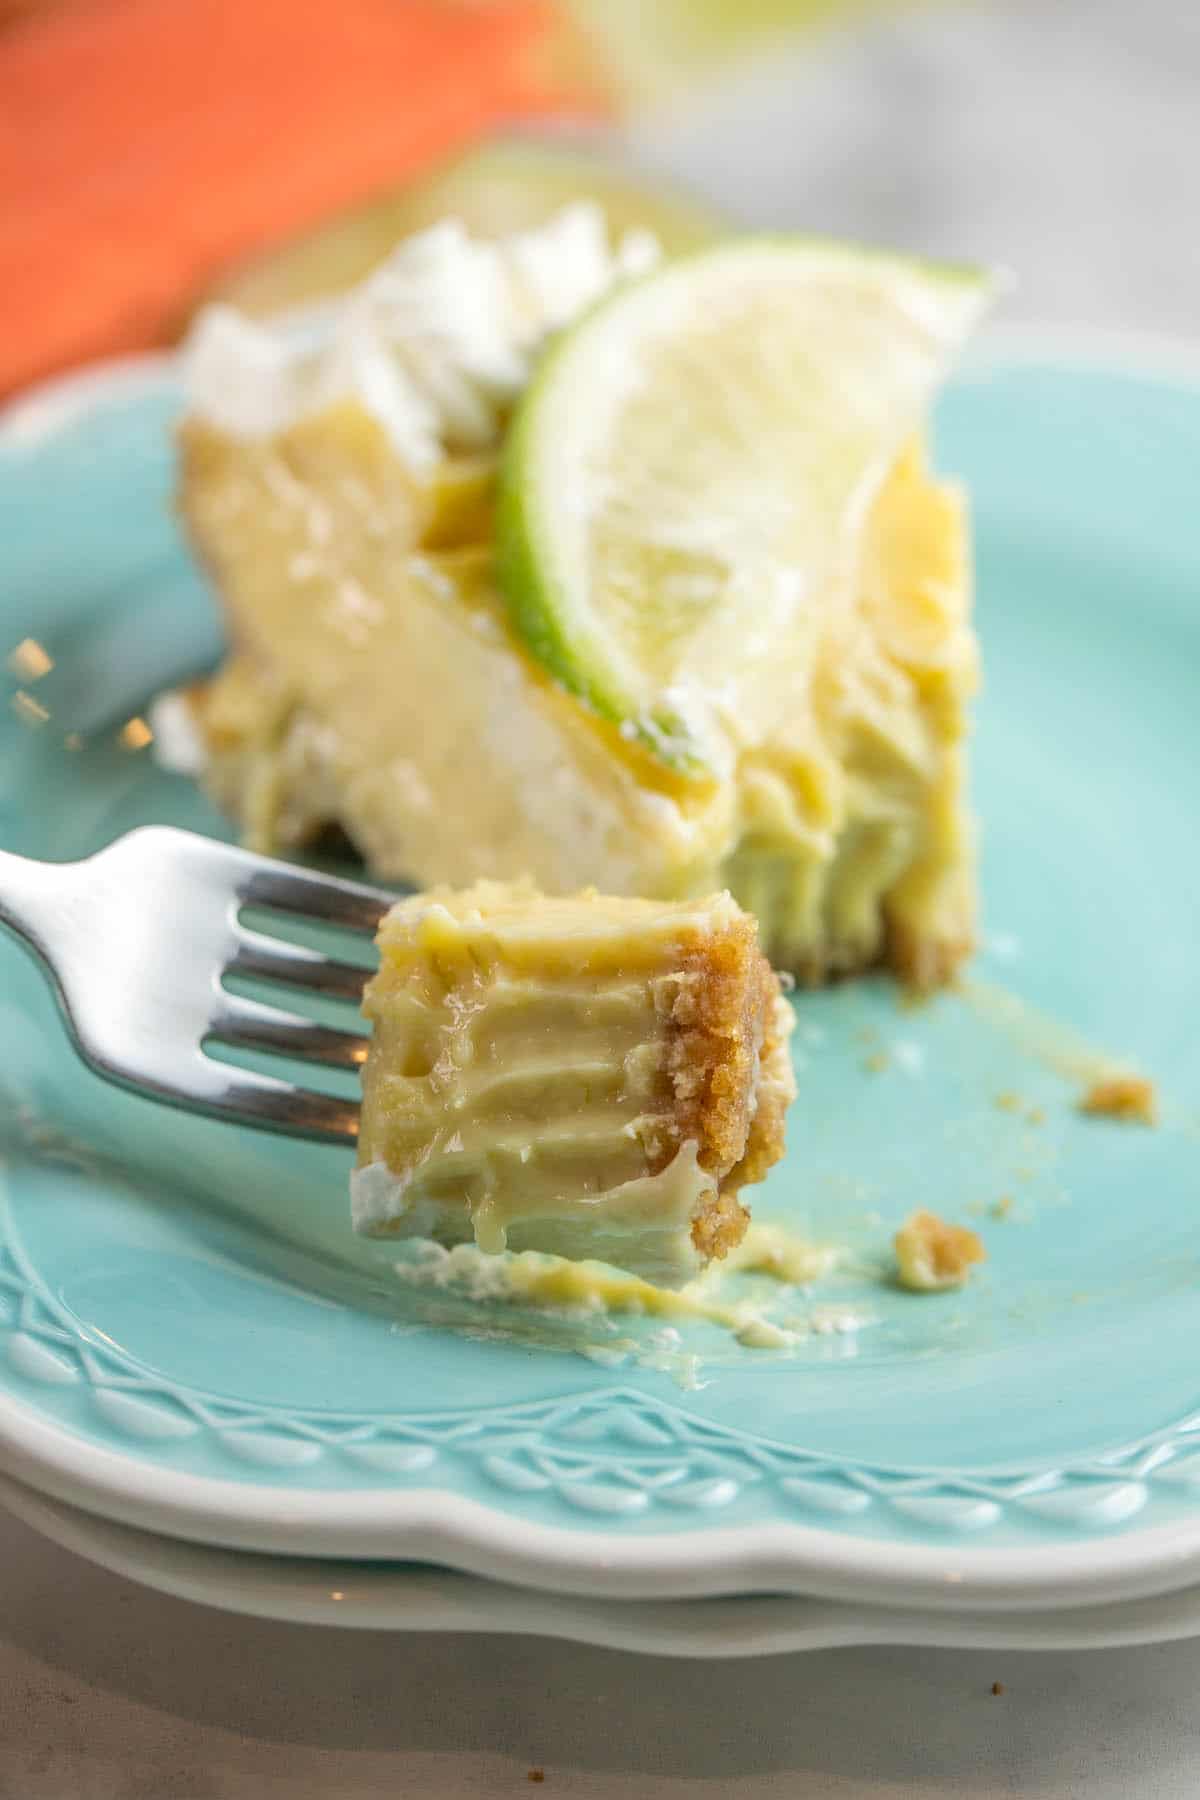 Tequila Lime Margarita Pie: Enjoy your margarita in dessert form, with a silky smooth lime custard made with tequila and triple sec and a salted graham crust. Make ahead for easy entertaining! {bunsenburnerbakery.com} #pie #margaritapie #cincodemayo #mexican